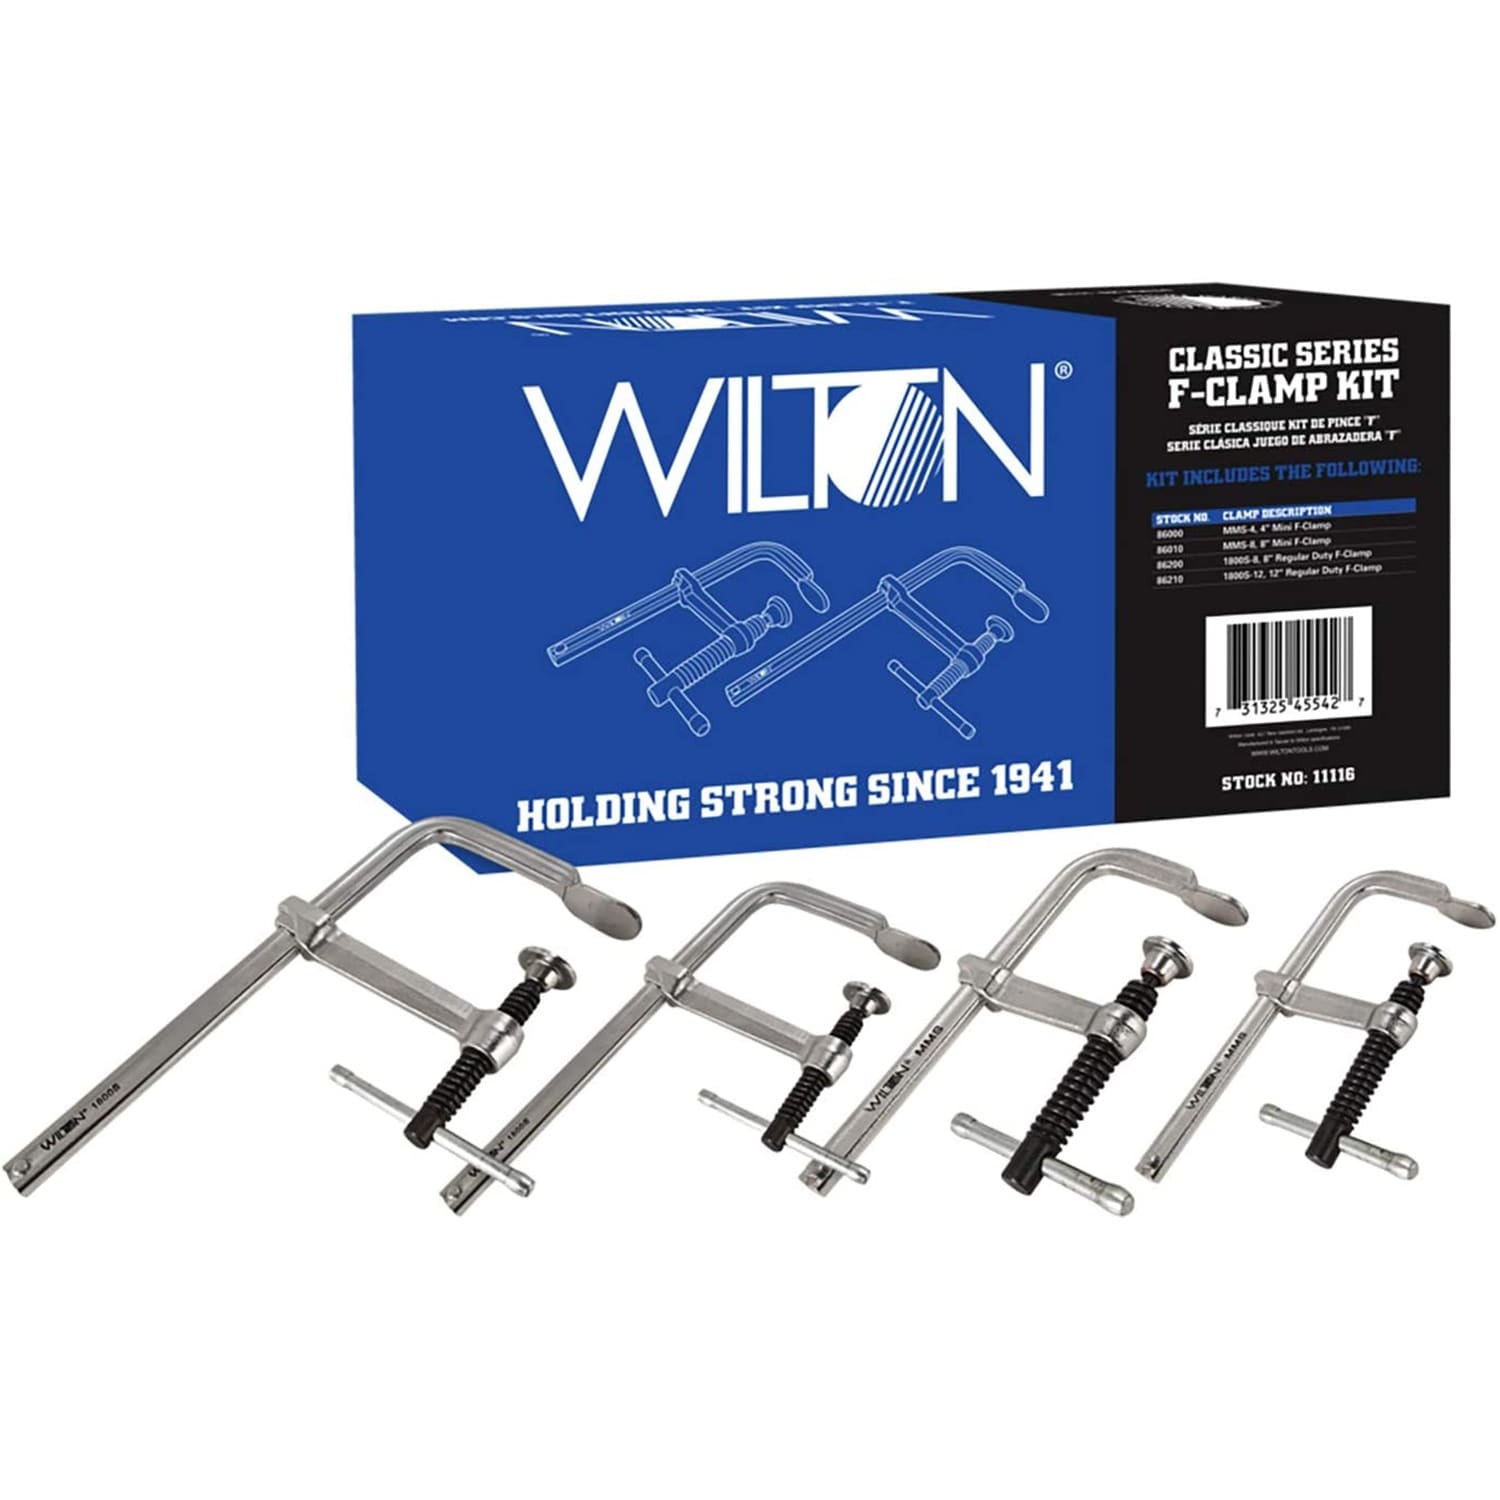 Wilton Tools JPW-11116 Regular Duty Drop Forged Oxide Spindle F Clamp,  Pack 11.2 Bed Bath  Beyond 37315697